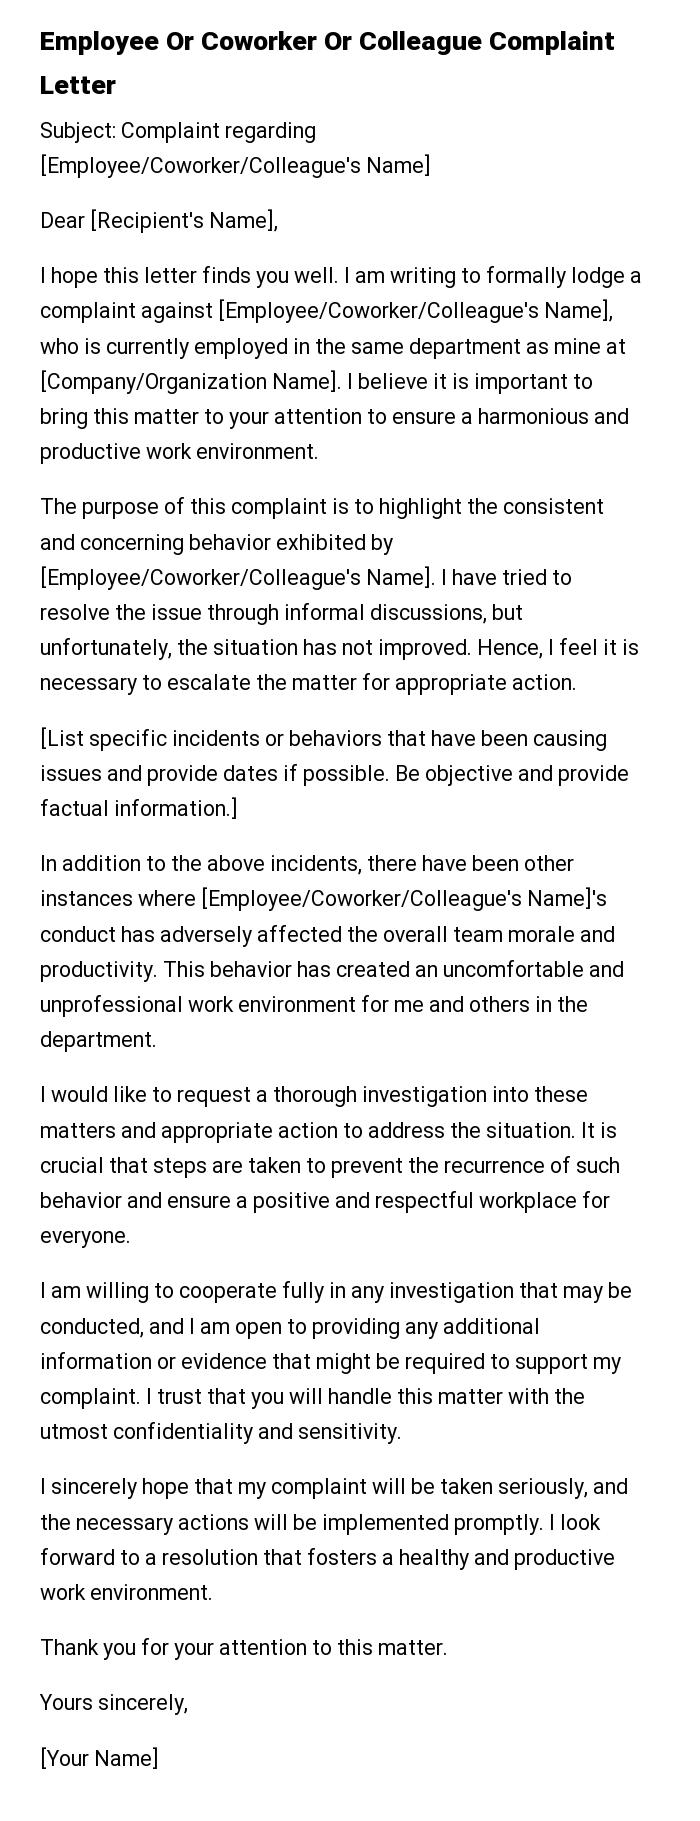 Employee Or Coworker Or Colleague Complaint Letter